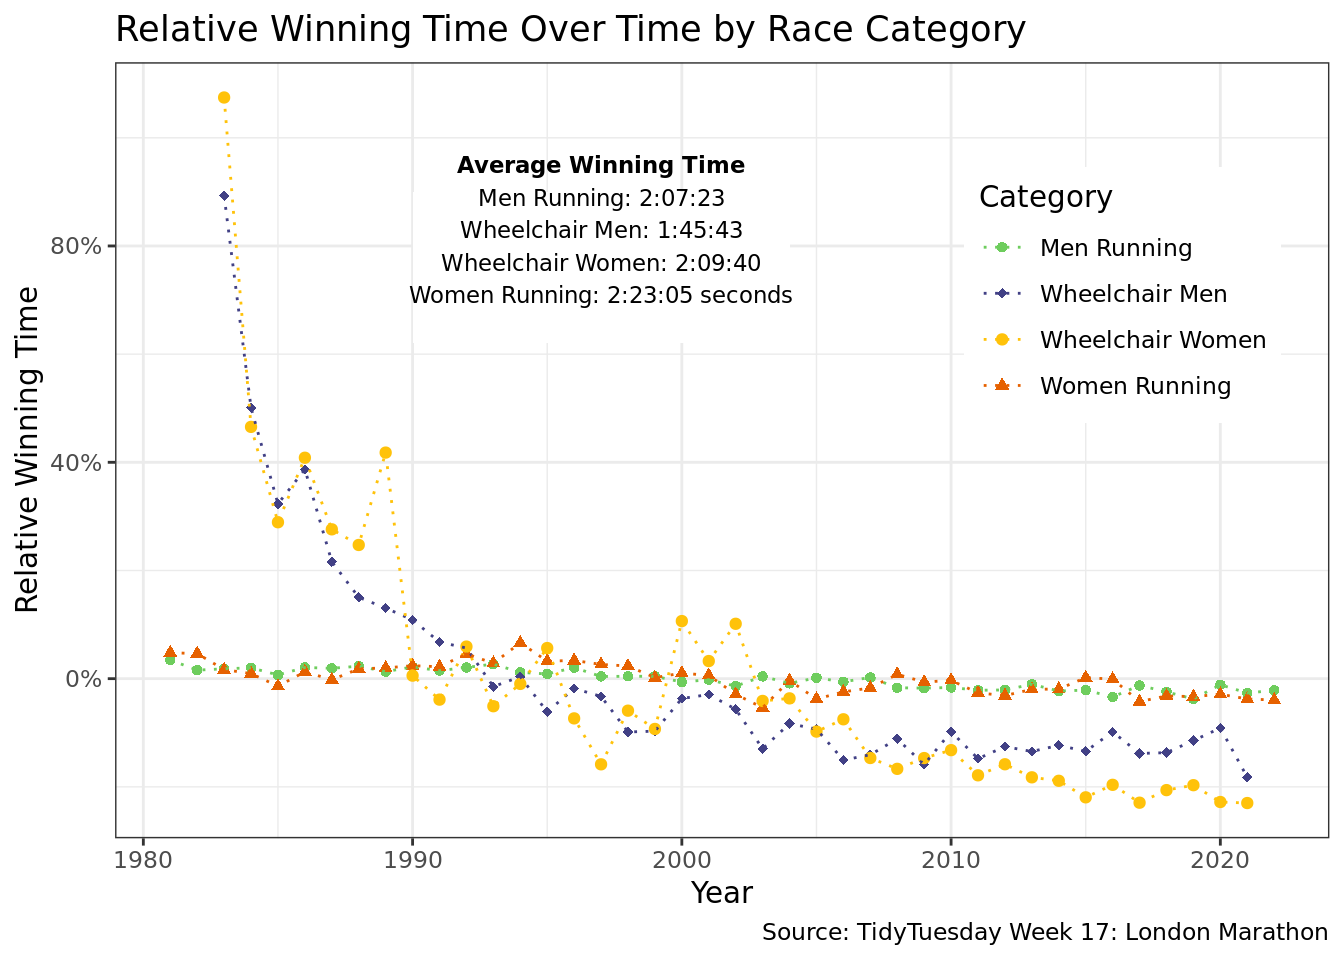 This figure is a line graph with points at each year titled “Relative Winning Time Over Time by Race Category”. Relative winning time is defined as the winning time for that year divided by the average winning time from 1981-2020. It has lines for Men’s Running, Women’s Running, Wheelchair Men and Wheelchair Women. Times from both Wheelchair Men and Wheelchair Women have remained relatively constant with relative win time around 0%. Men’s Running and Women’s Running started above 80% and have trended downs since then, with both remaining below 0% since 2003.